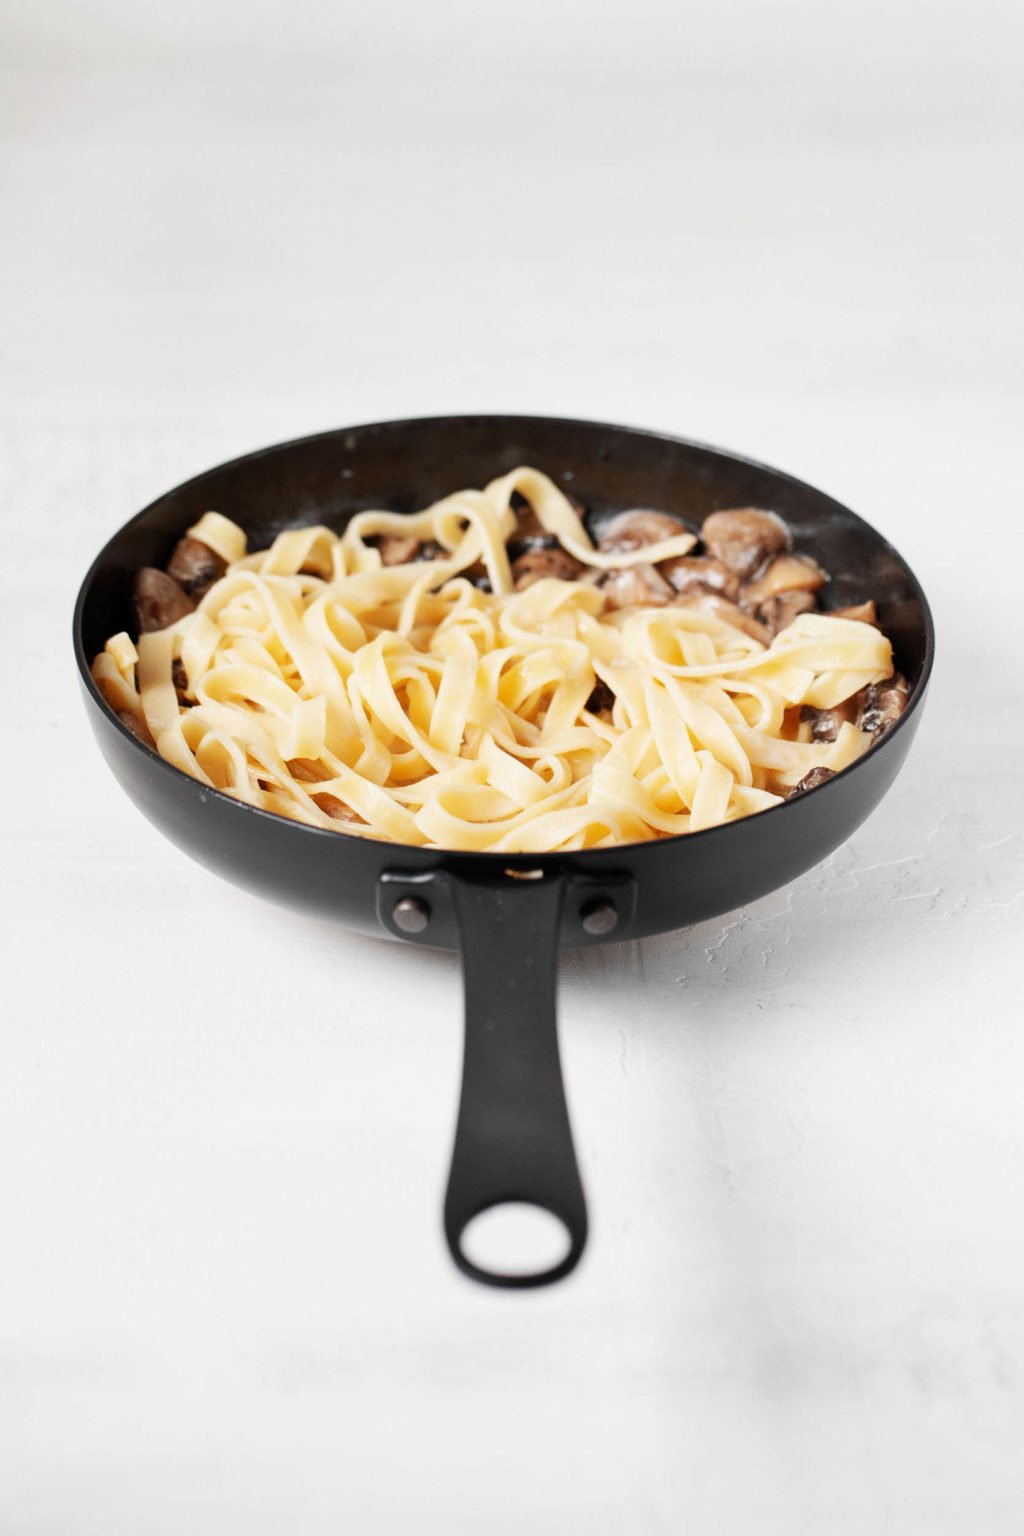 A black, cast iron skillet is filled with fettucine, vegetables, and a creamy sauce.